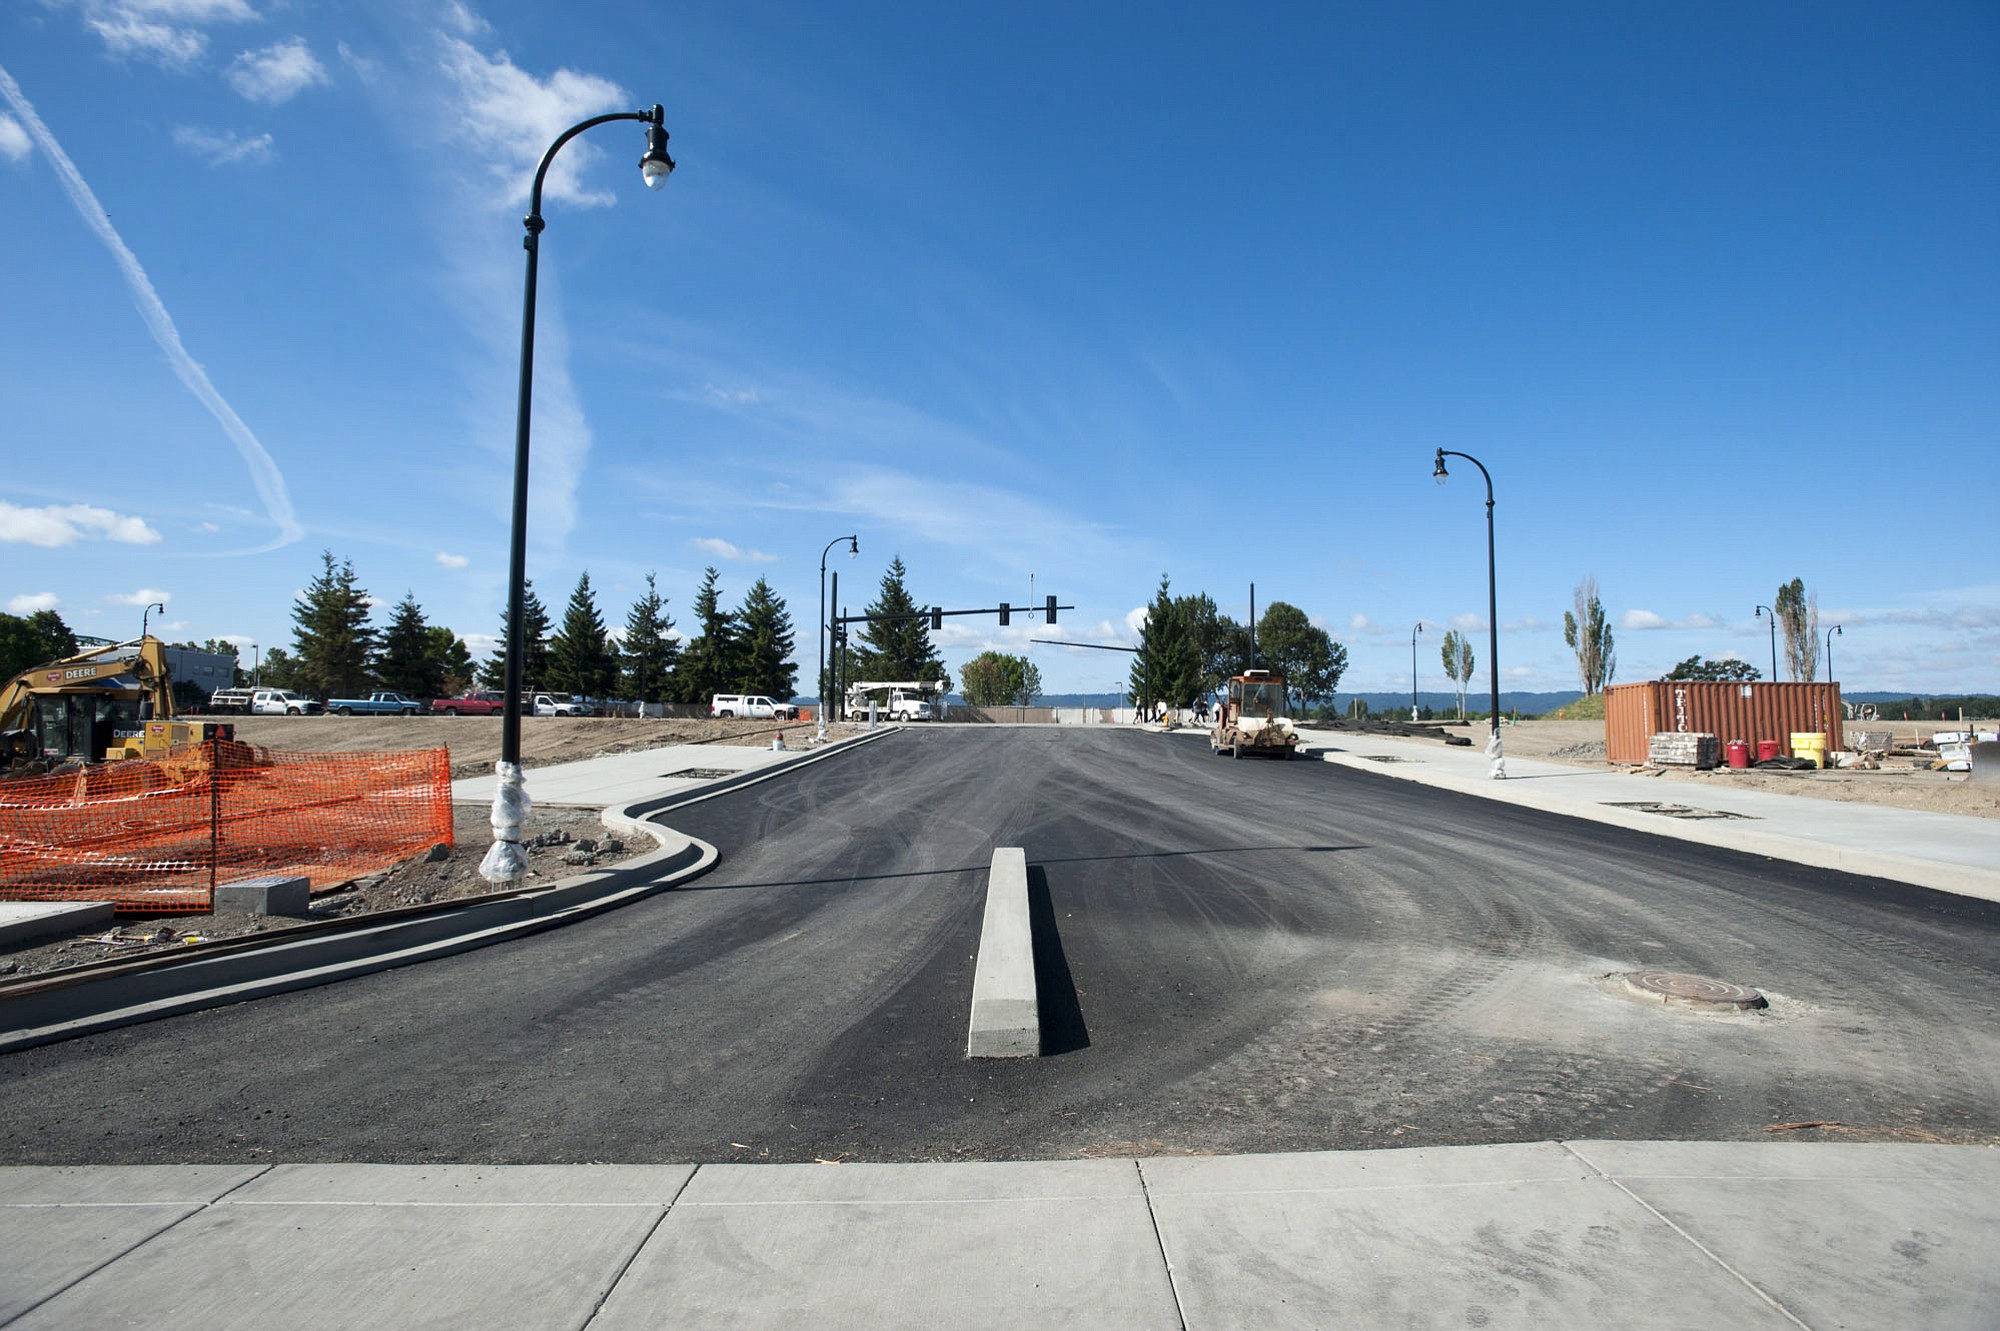 The roads, curbing and utilities in the $1.3 billion Columbia River waterfront redevelopment project are in place, and over the next few weeks, workers will finish installing streetlights and traffic signals, pouring the rest of the sidewalks and planting landscaping.